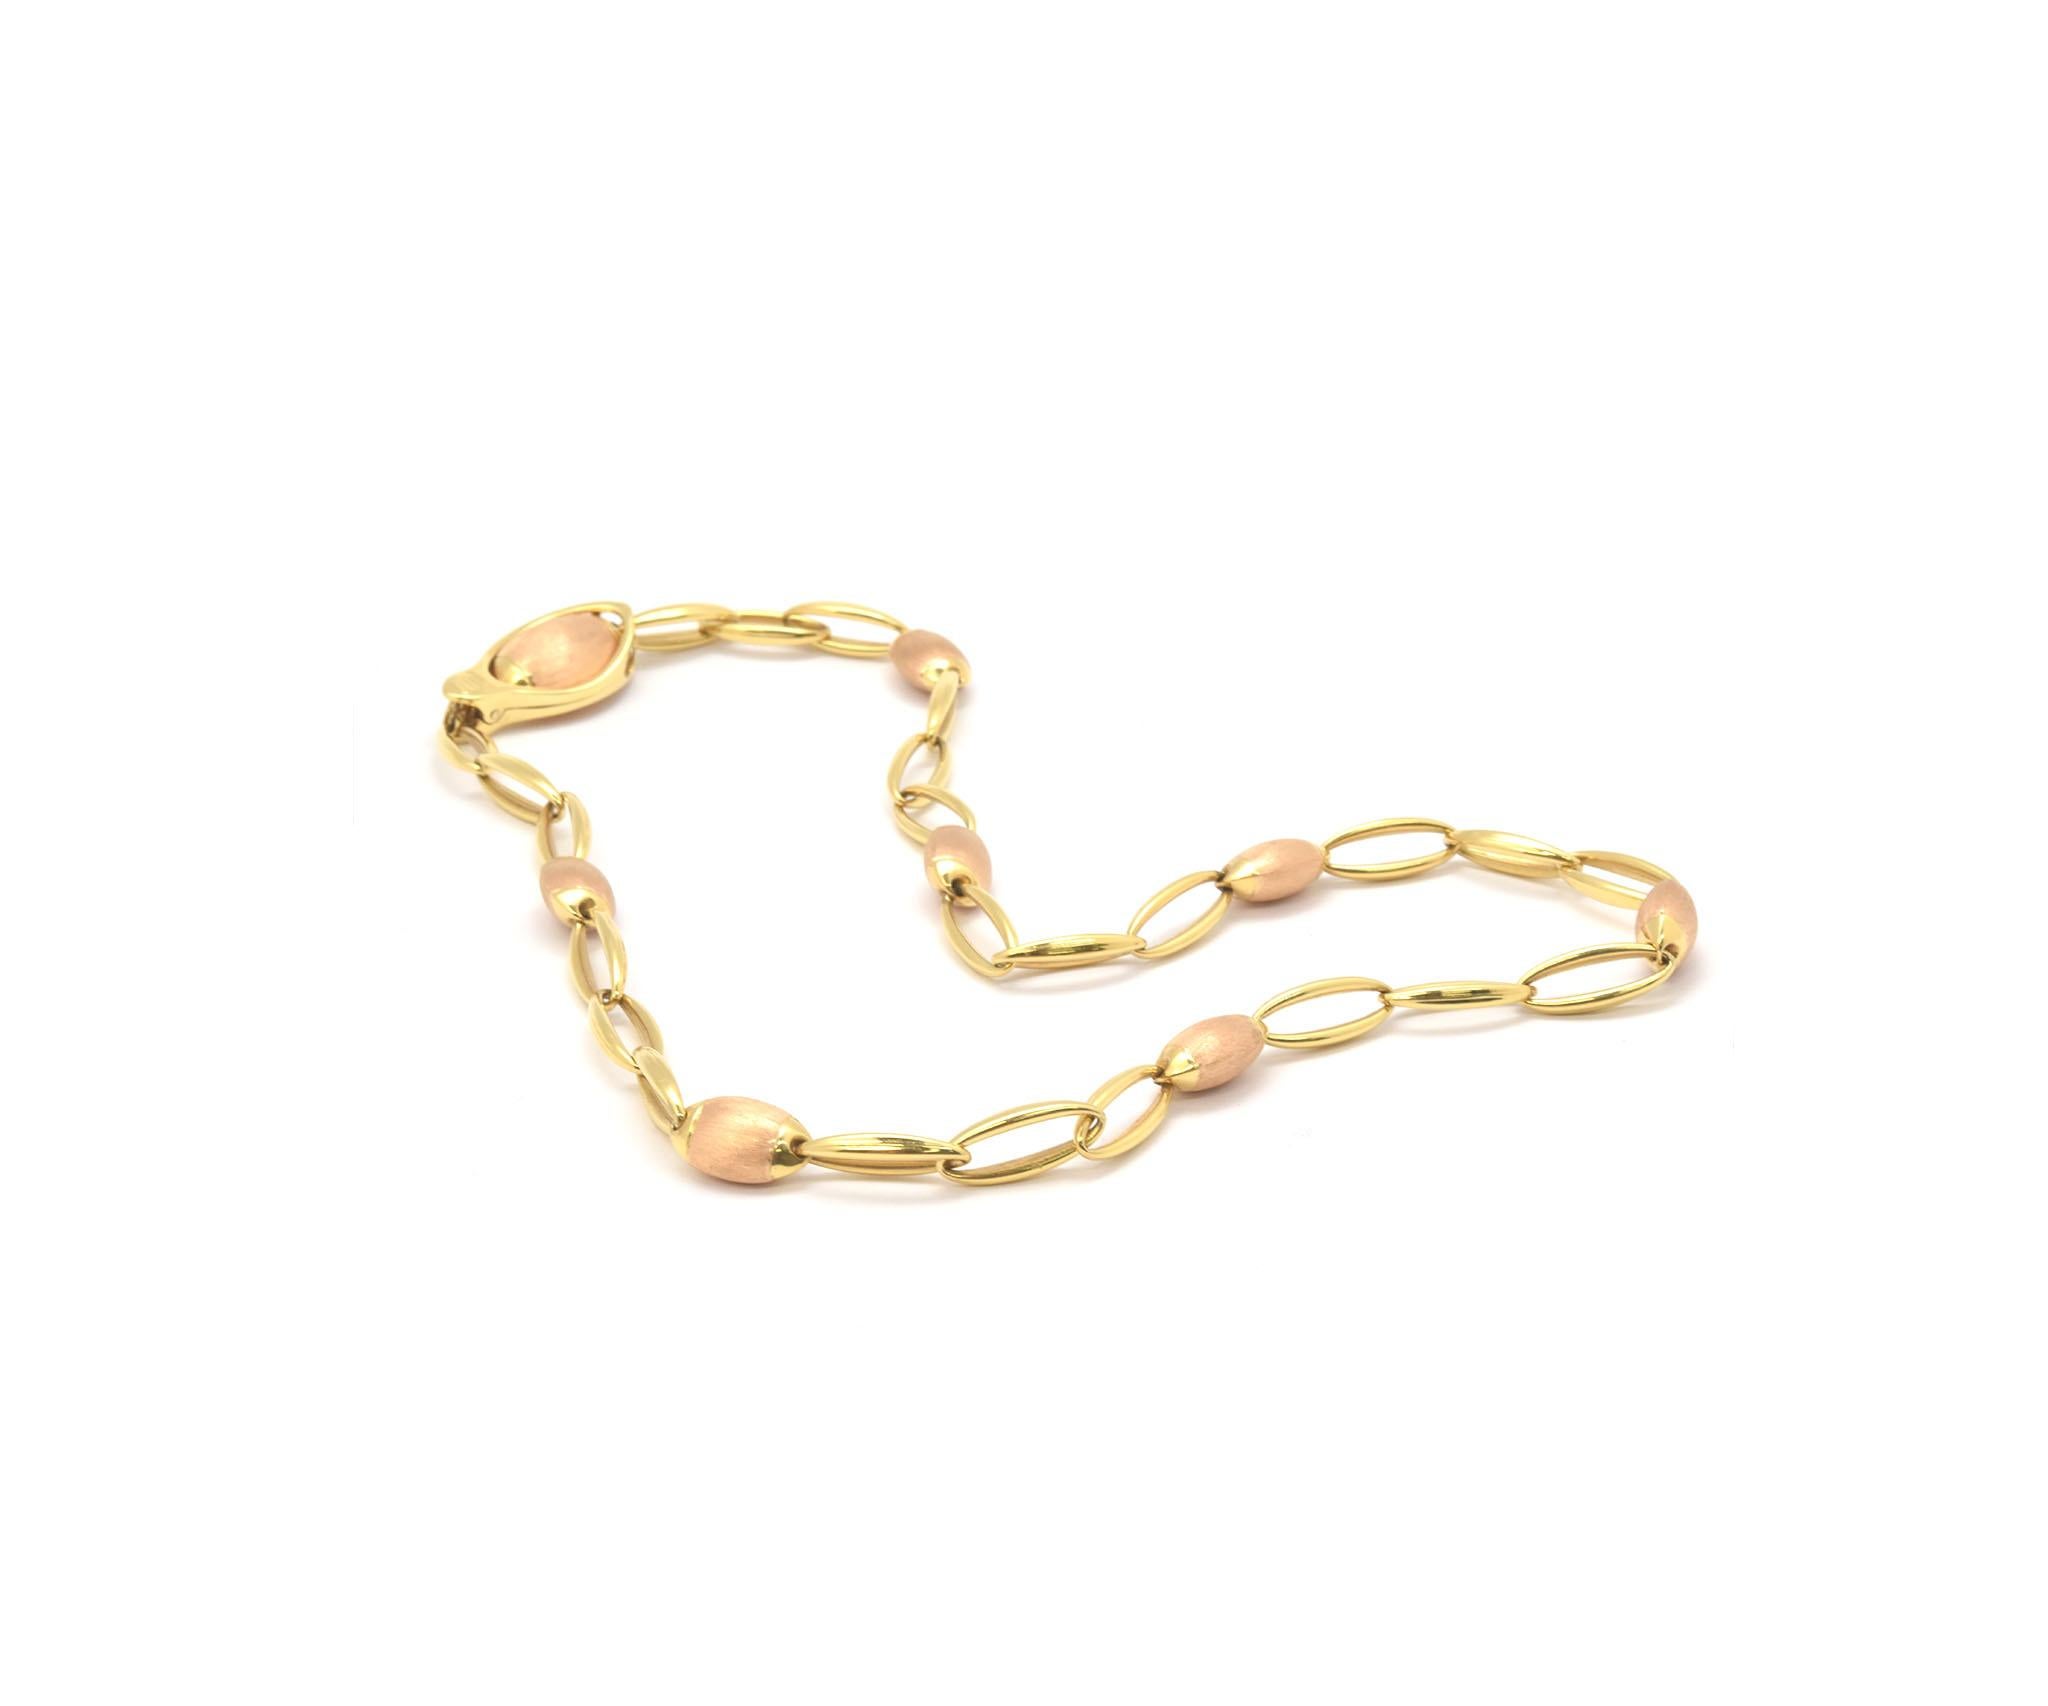 This stunning chain is made in solid 18k gold (rose and yellow) by designer Chimento. The necklace measures 22 inches in length, and it measures 17mm wide at the widest point. The necklace weighs 38.2 grams. It is signed “Chimento 750.” The necklace